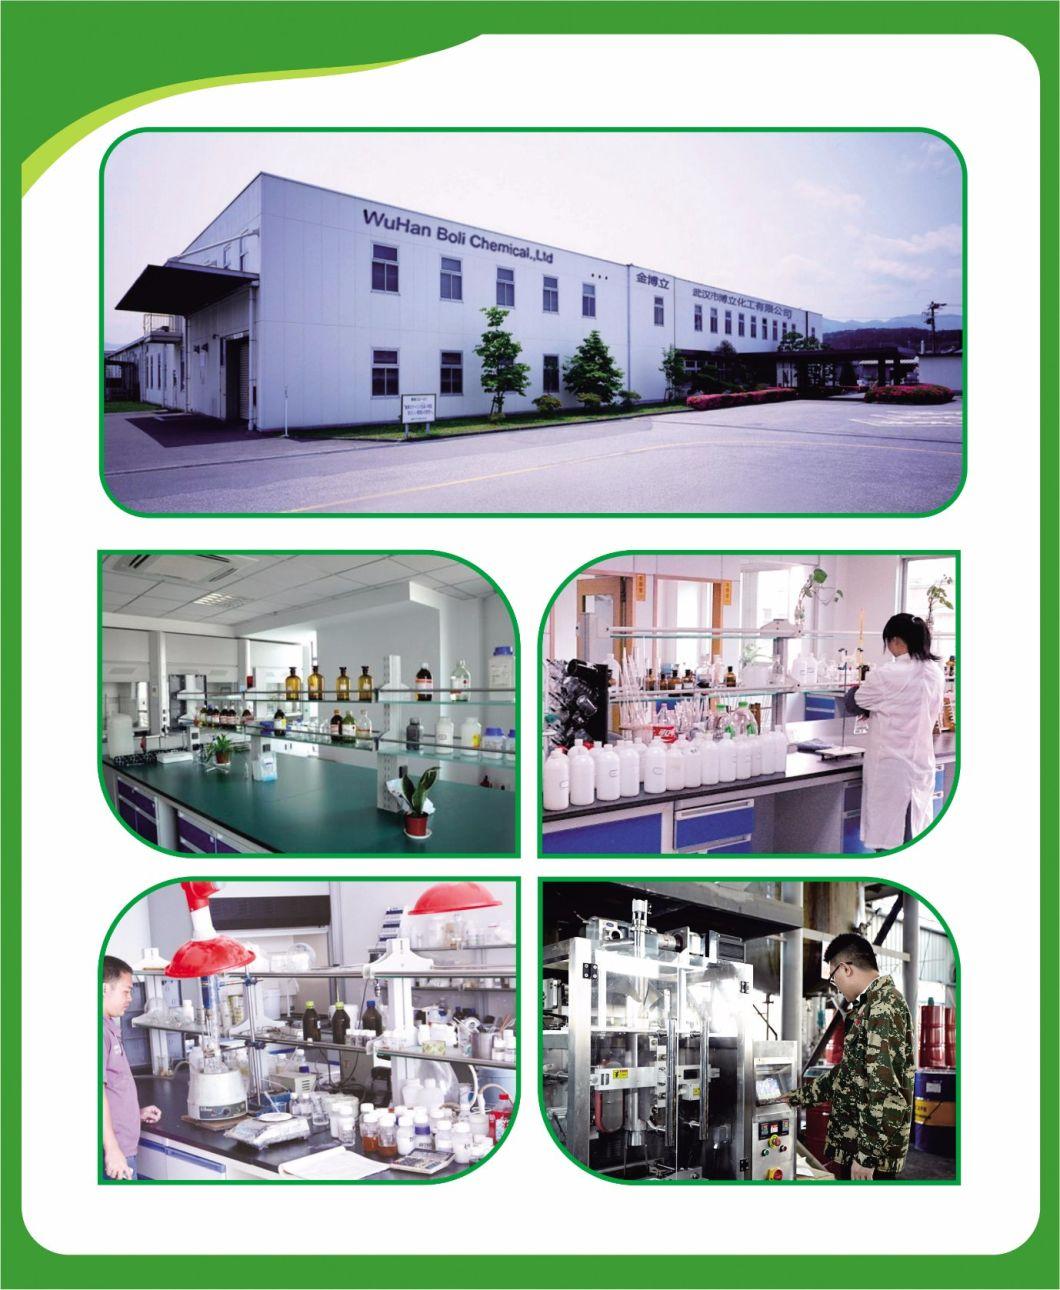 Low Price Non Toxic Spray Adhesive for Sponge (China adhesive supplier/GBL adhesive)